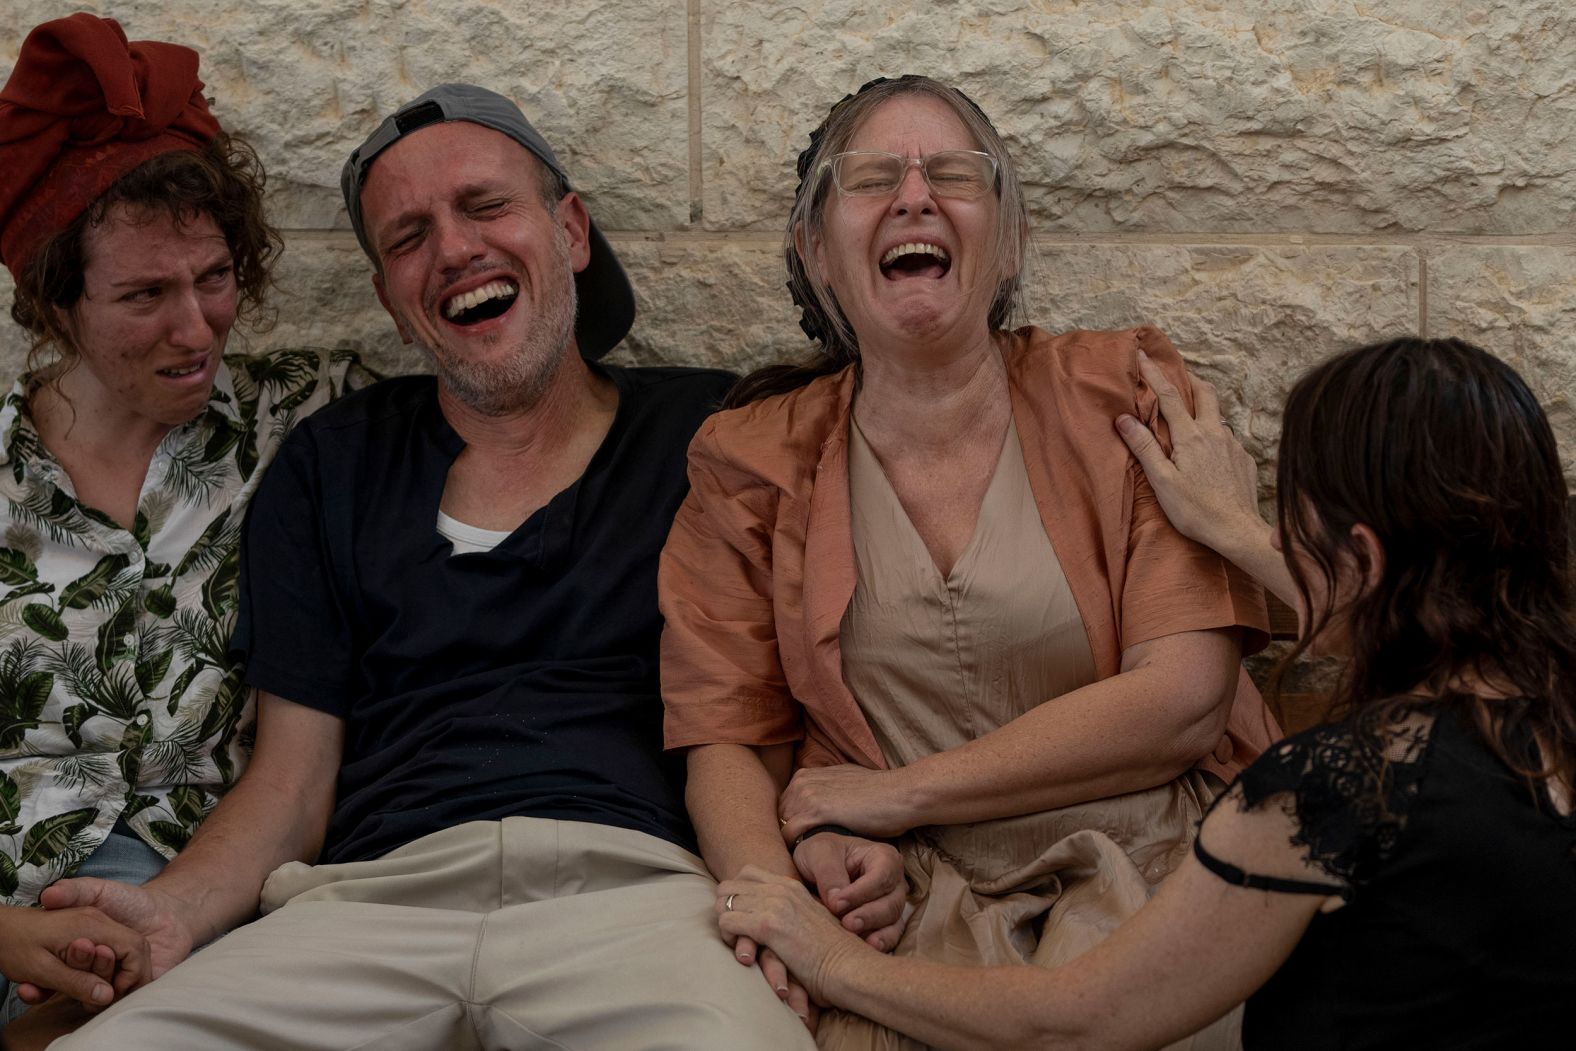 Itzik and Miriam Shafir, center, mourn during their son's funeral at a cemetery in Modiin Maccabim, Israel, on Wednesday, October 11. Their son, Dor Shafir, and his girlfriend, Savion Kiper, were killed during <a href="index.php?page=&url=https%3A%2F%2Fwww.cnn.com%2F2023%2F10%2F07%2Fmiddleeast%2Fisrael-gaza-fighting-hamas-attack-music-festival-intl-hnk%2Findex.html" target="_blank">Hamas' attack on a music festival</a> on Saturday.